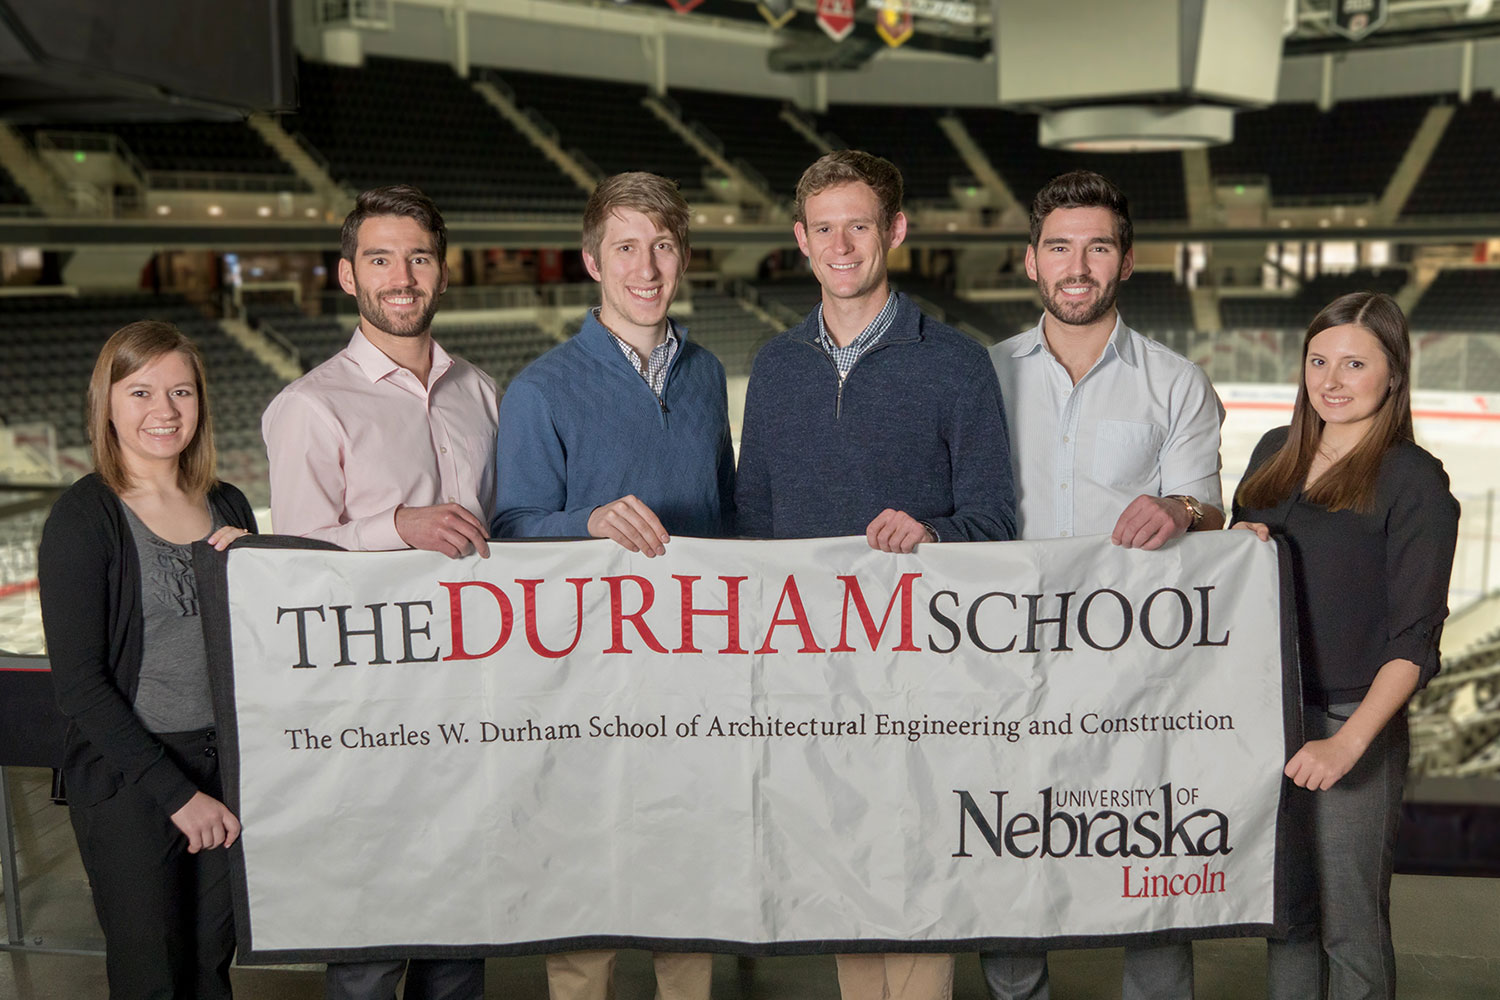 A team of faculty, alumni, and current students from The Durham School, with support from industry volunteers, was awarded the grand prize in the 2016 NCEES Engineering Award competition. One team of the students, pictured above, consisted of (from left) Brianna Brass, Adam Mackenzie, Jacob Clatanoff, Jacob Pulfer, Ben Mackenzie and Katie Gilg.